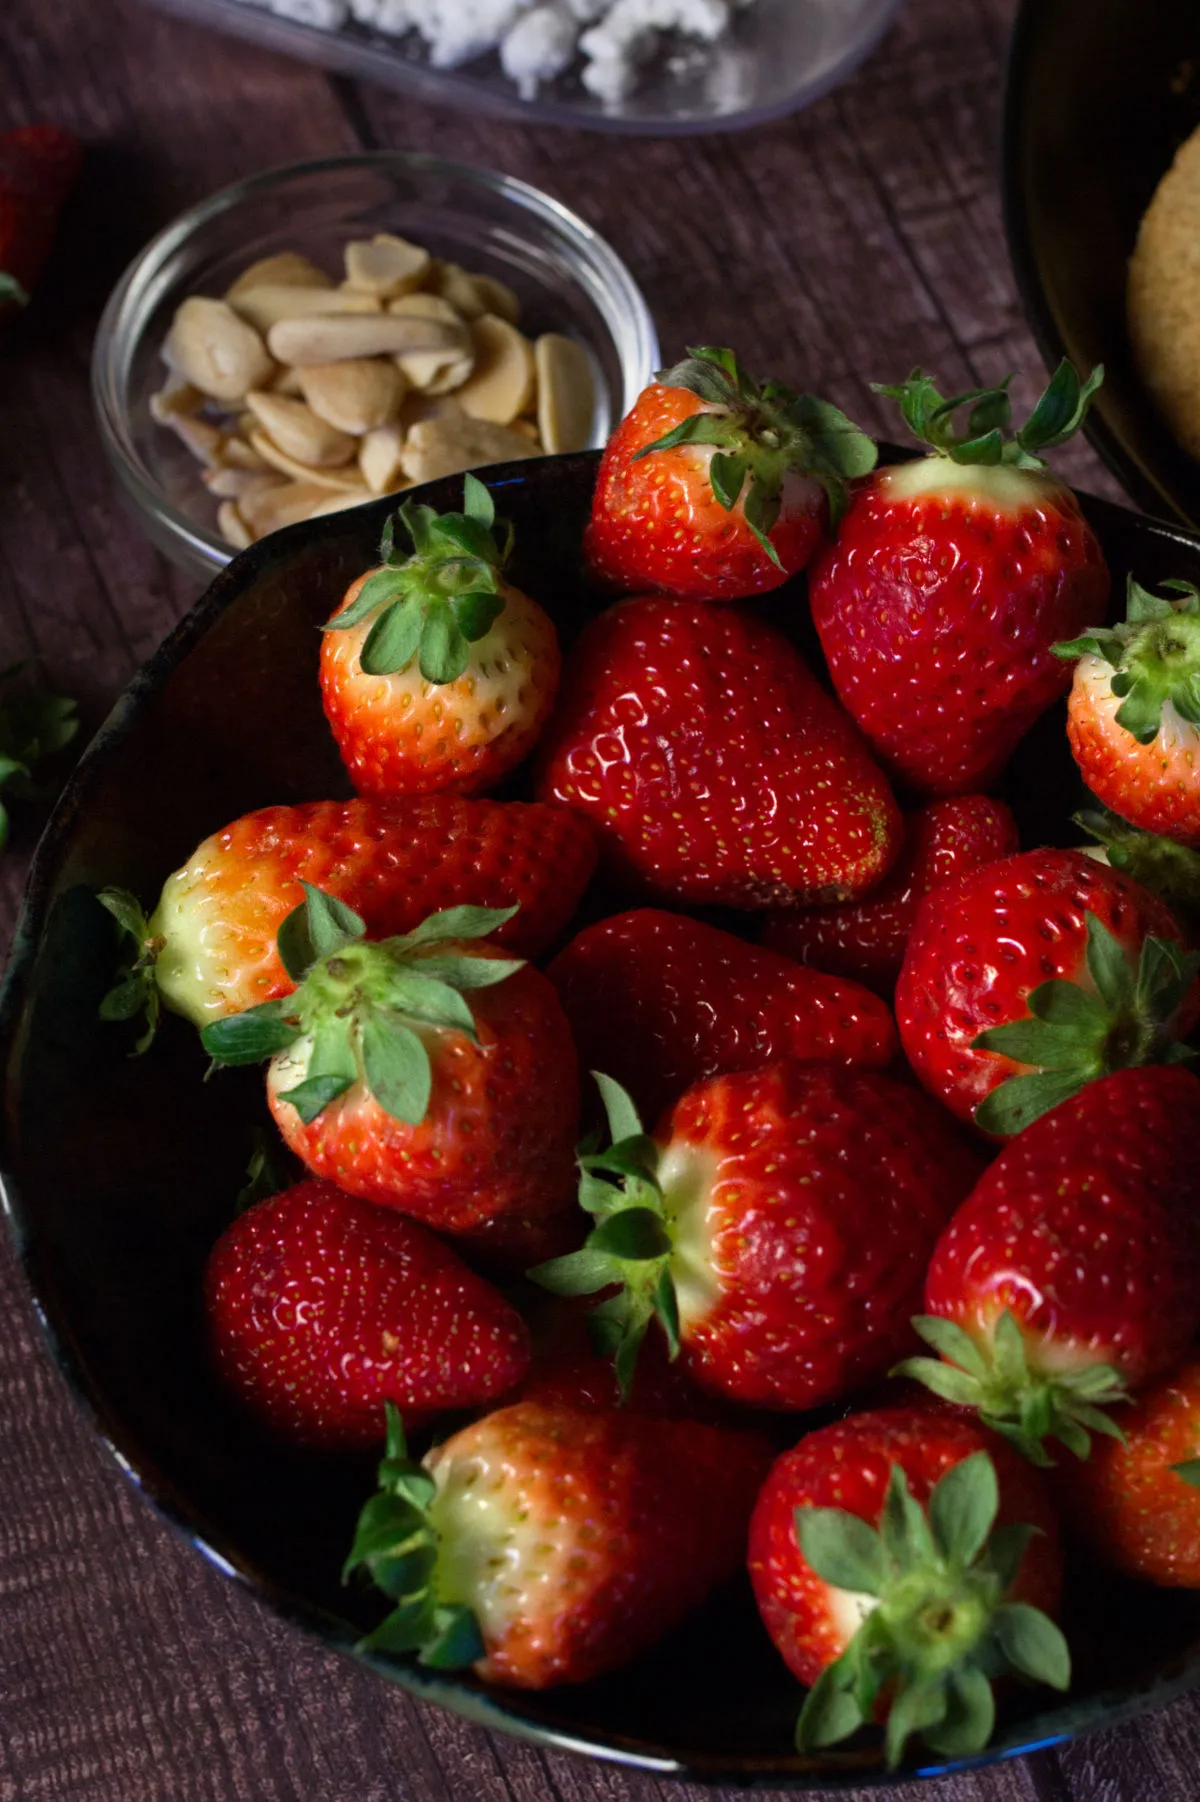 A bowl of fresh strawberries sits beside a small bowl of salted almonds.